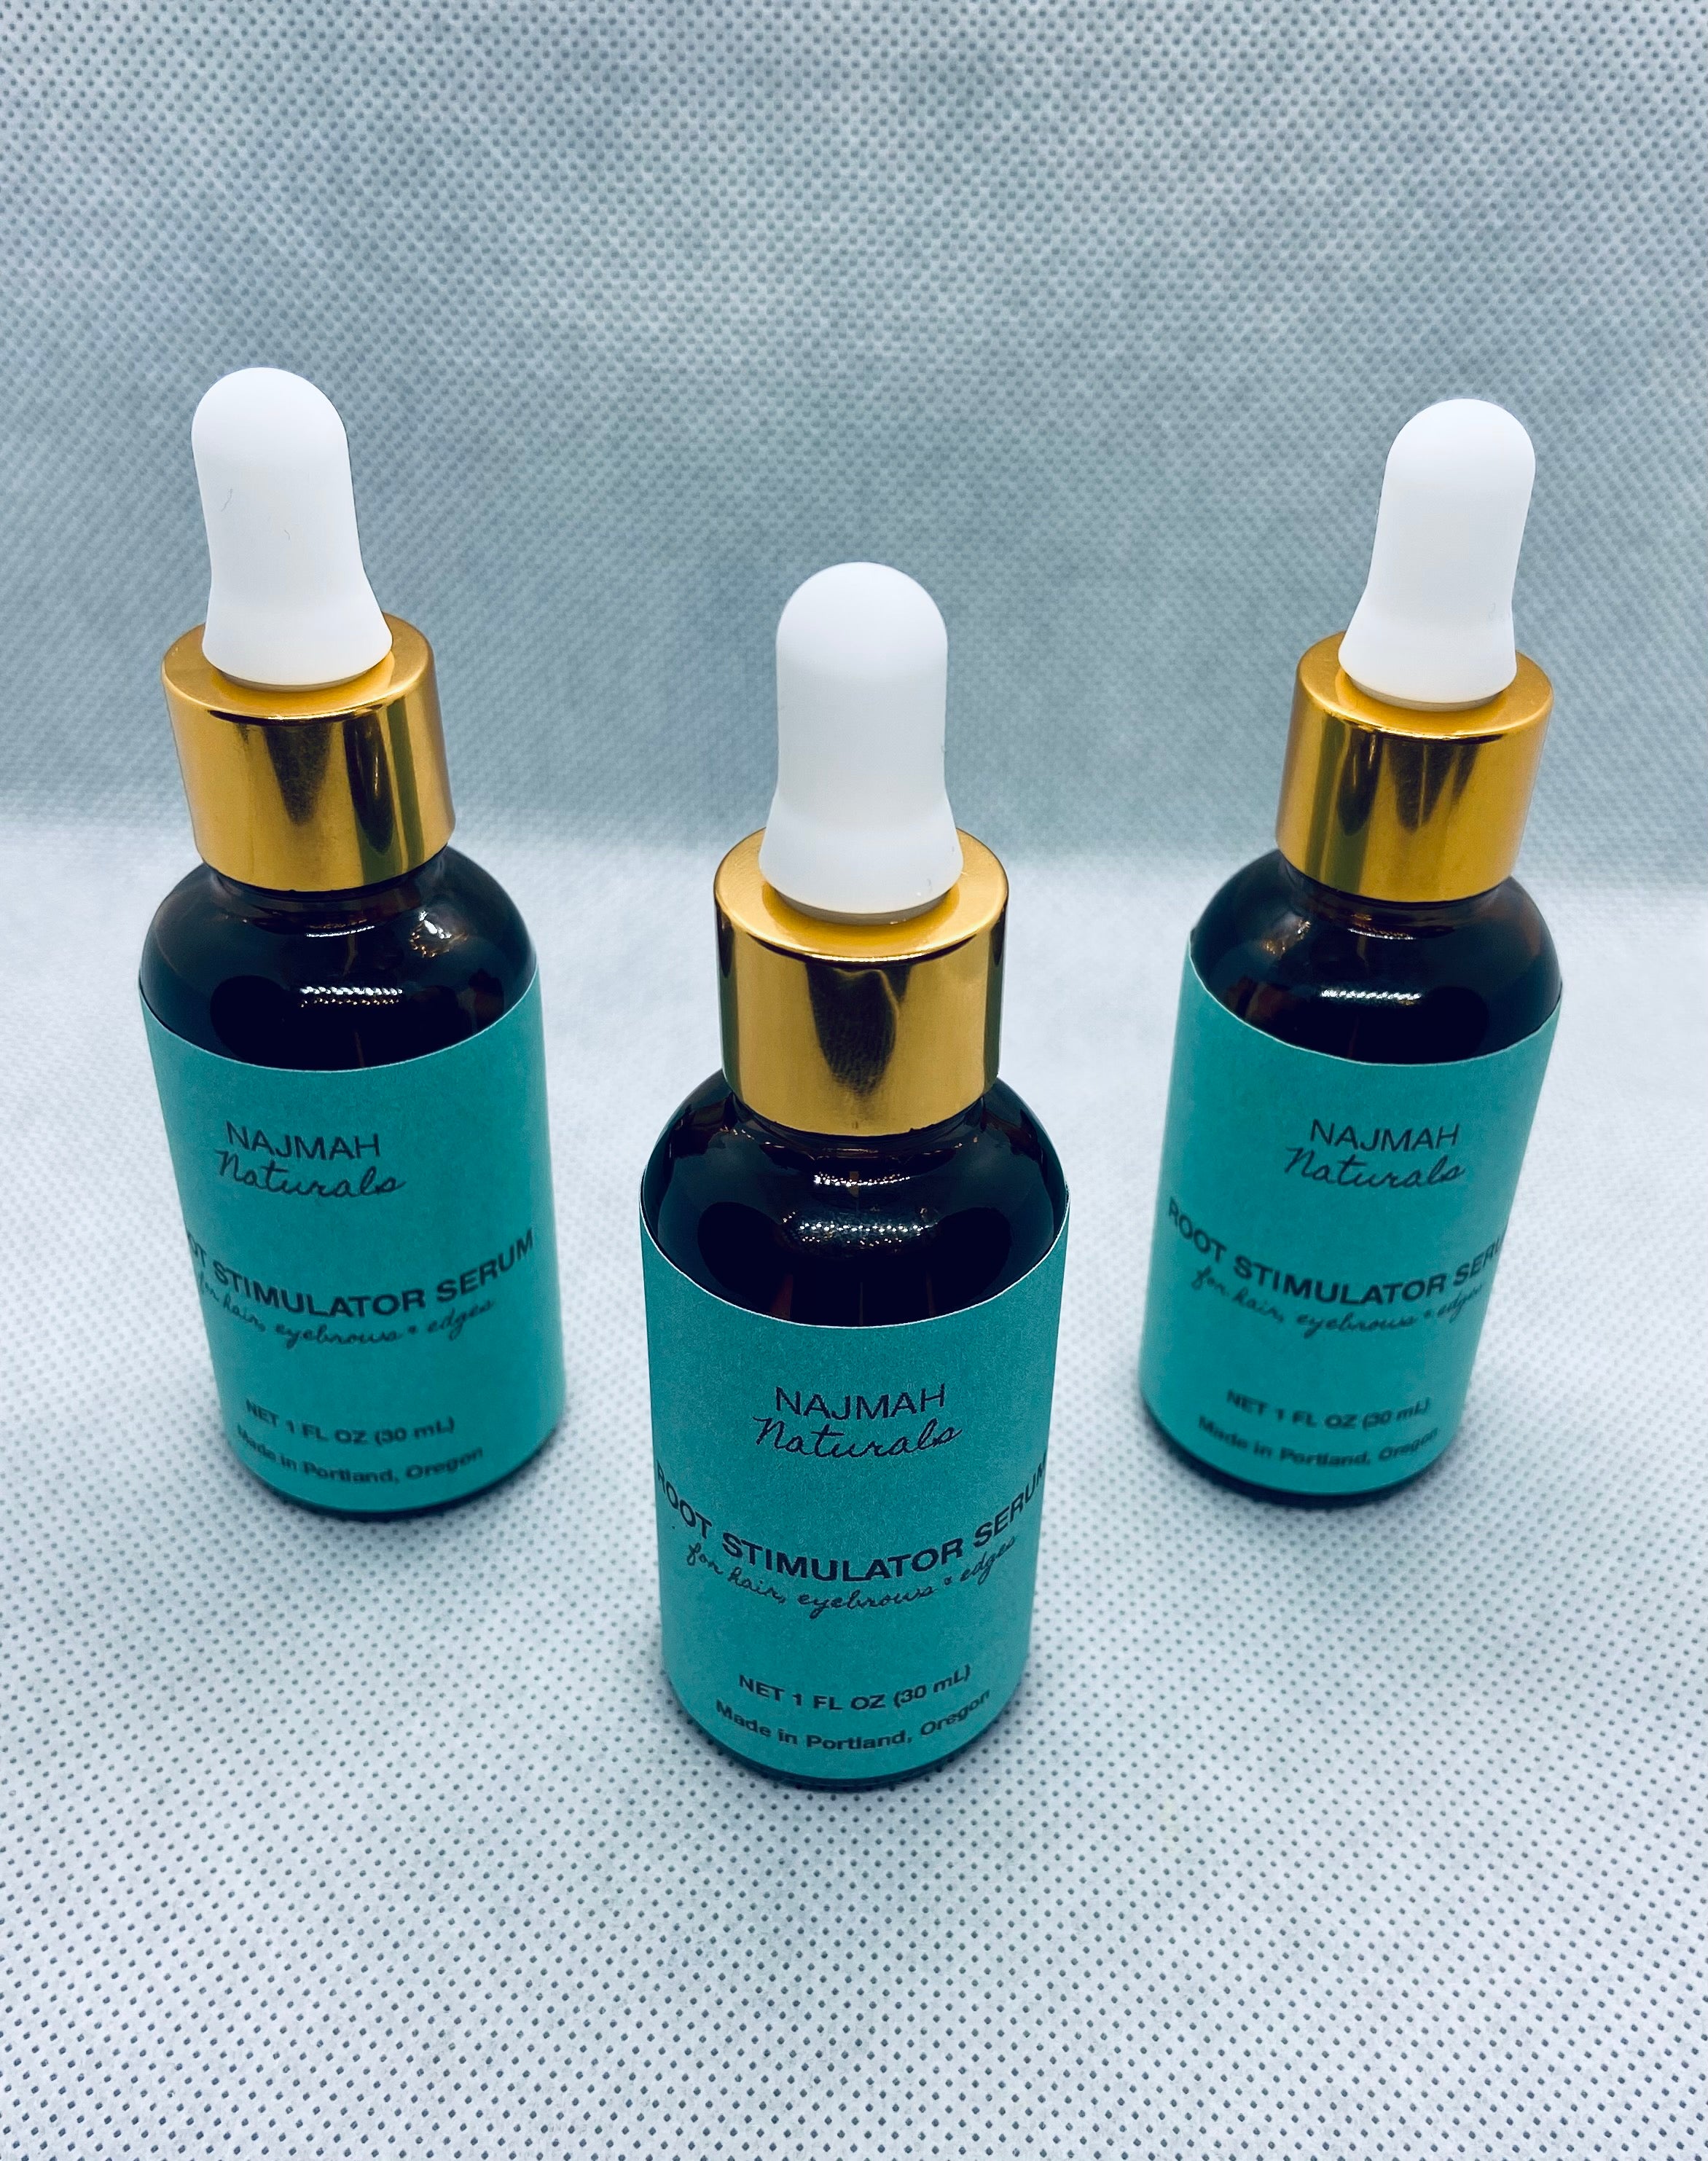 Our Root Stimulator Serum contains Organic Castor Oil, Kukui Nut Oil, Organic Black Cumin Seed Oil, Avocado Oil and Fragrance. Our formula is created with ingredients that strengthen hair and stimulate growth. The fragrance is a special blend of bergamot, lime, mandarin, cedar, tea tree and other essential oils.